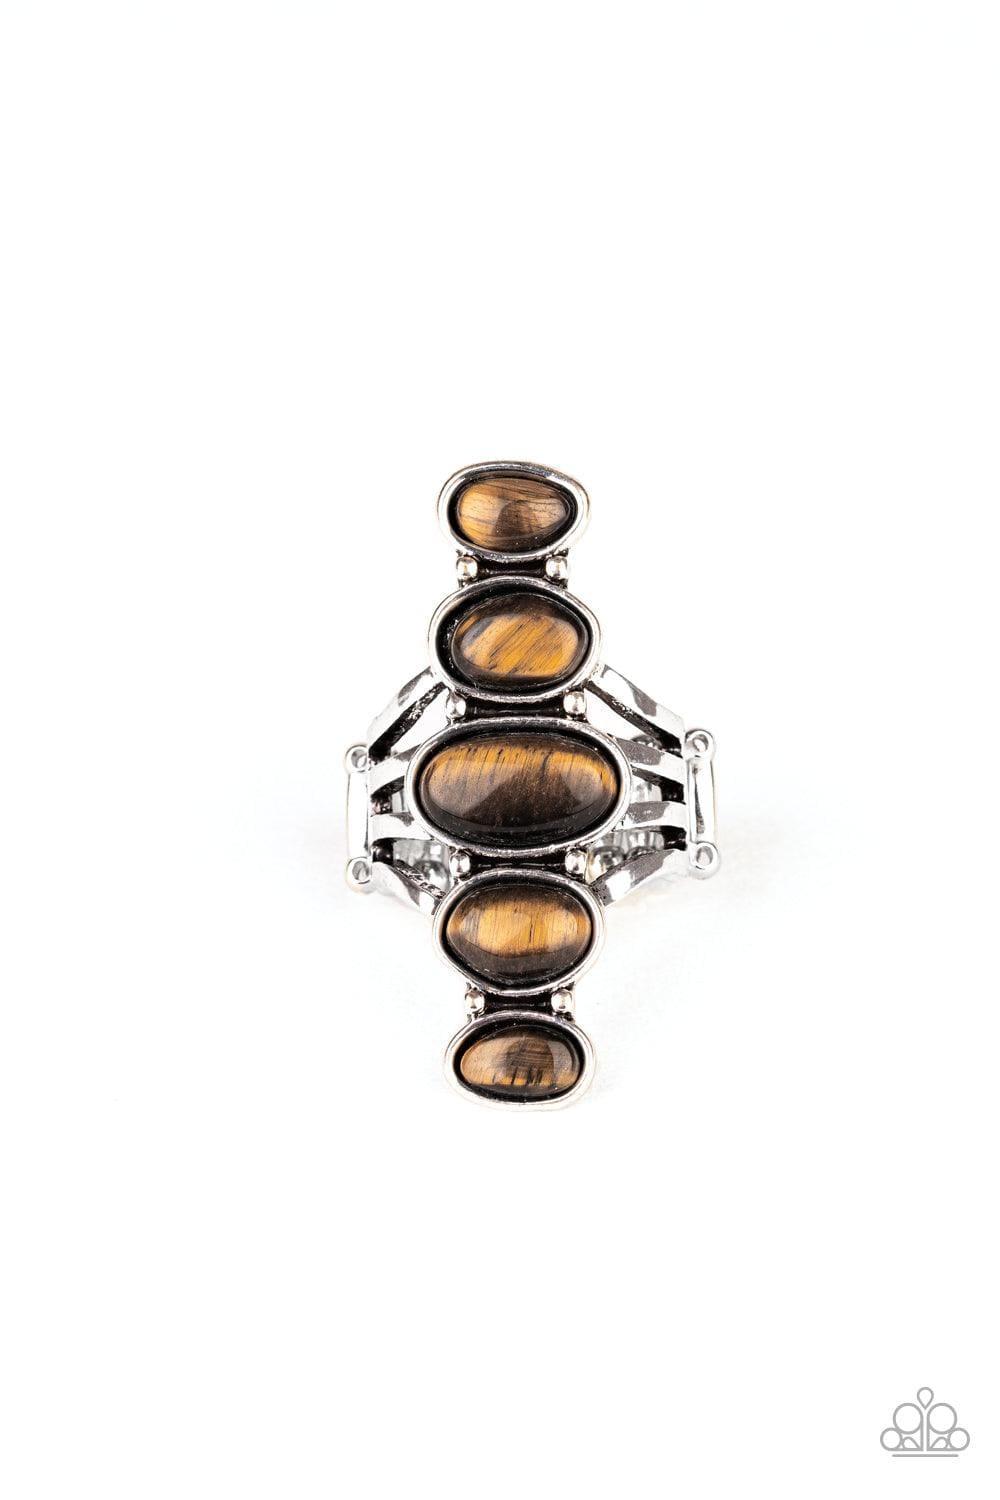 Paparazzi Accessories - Stone Sublime - Brown Ring - Bling by JessieK